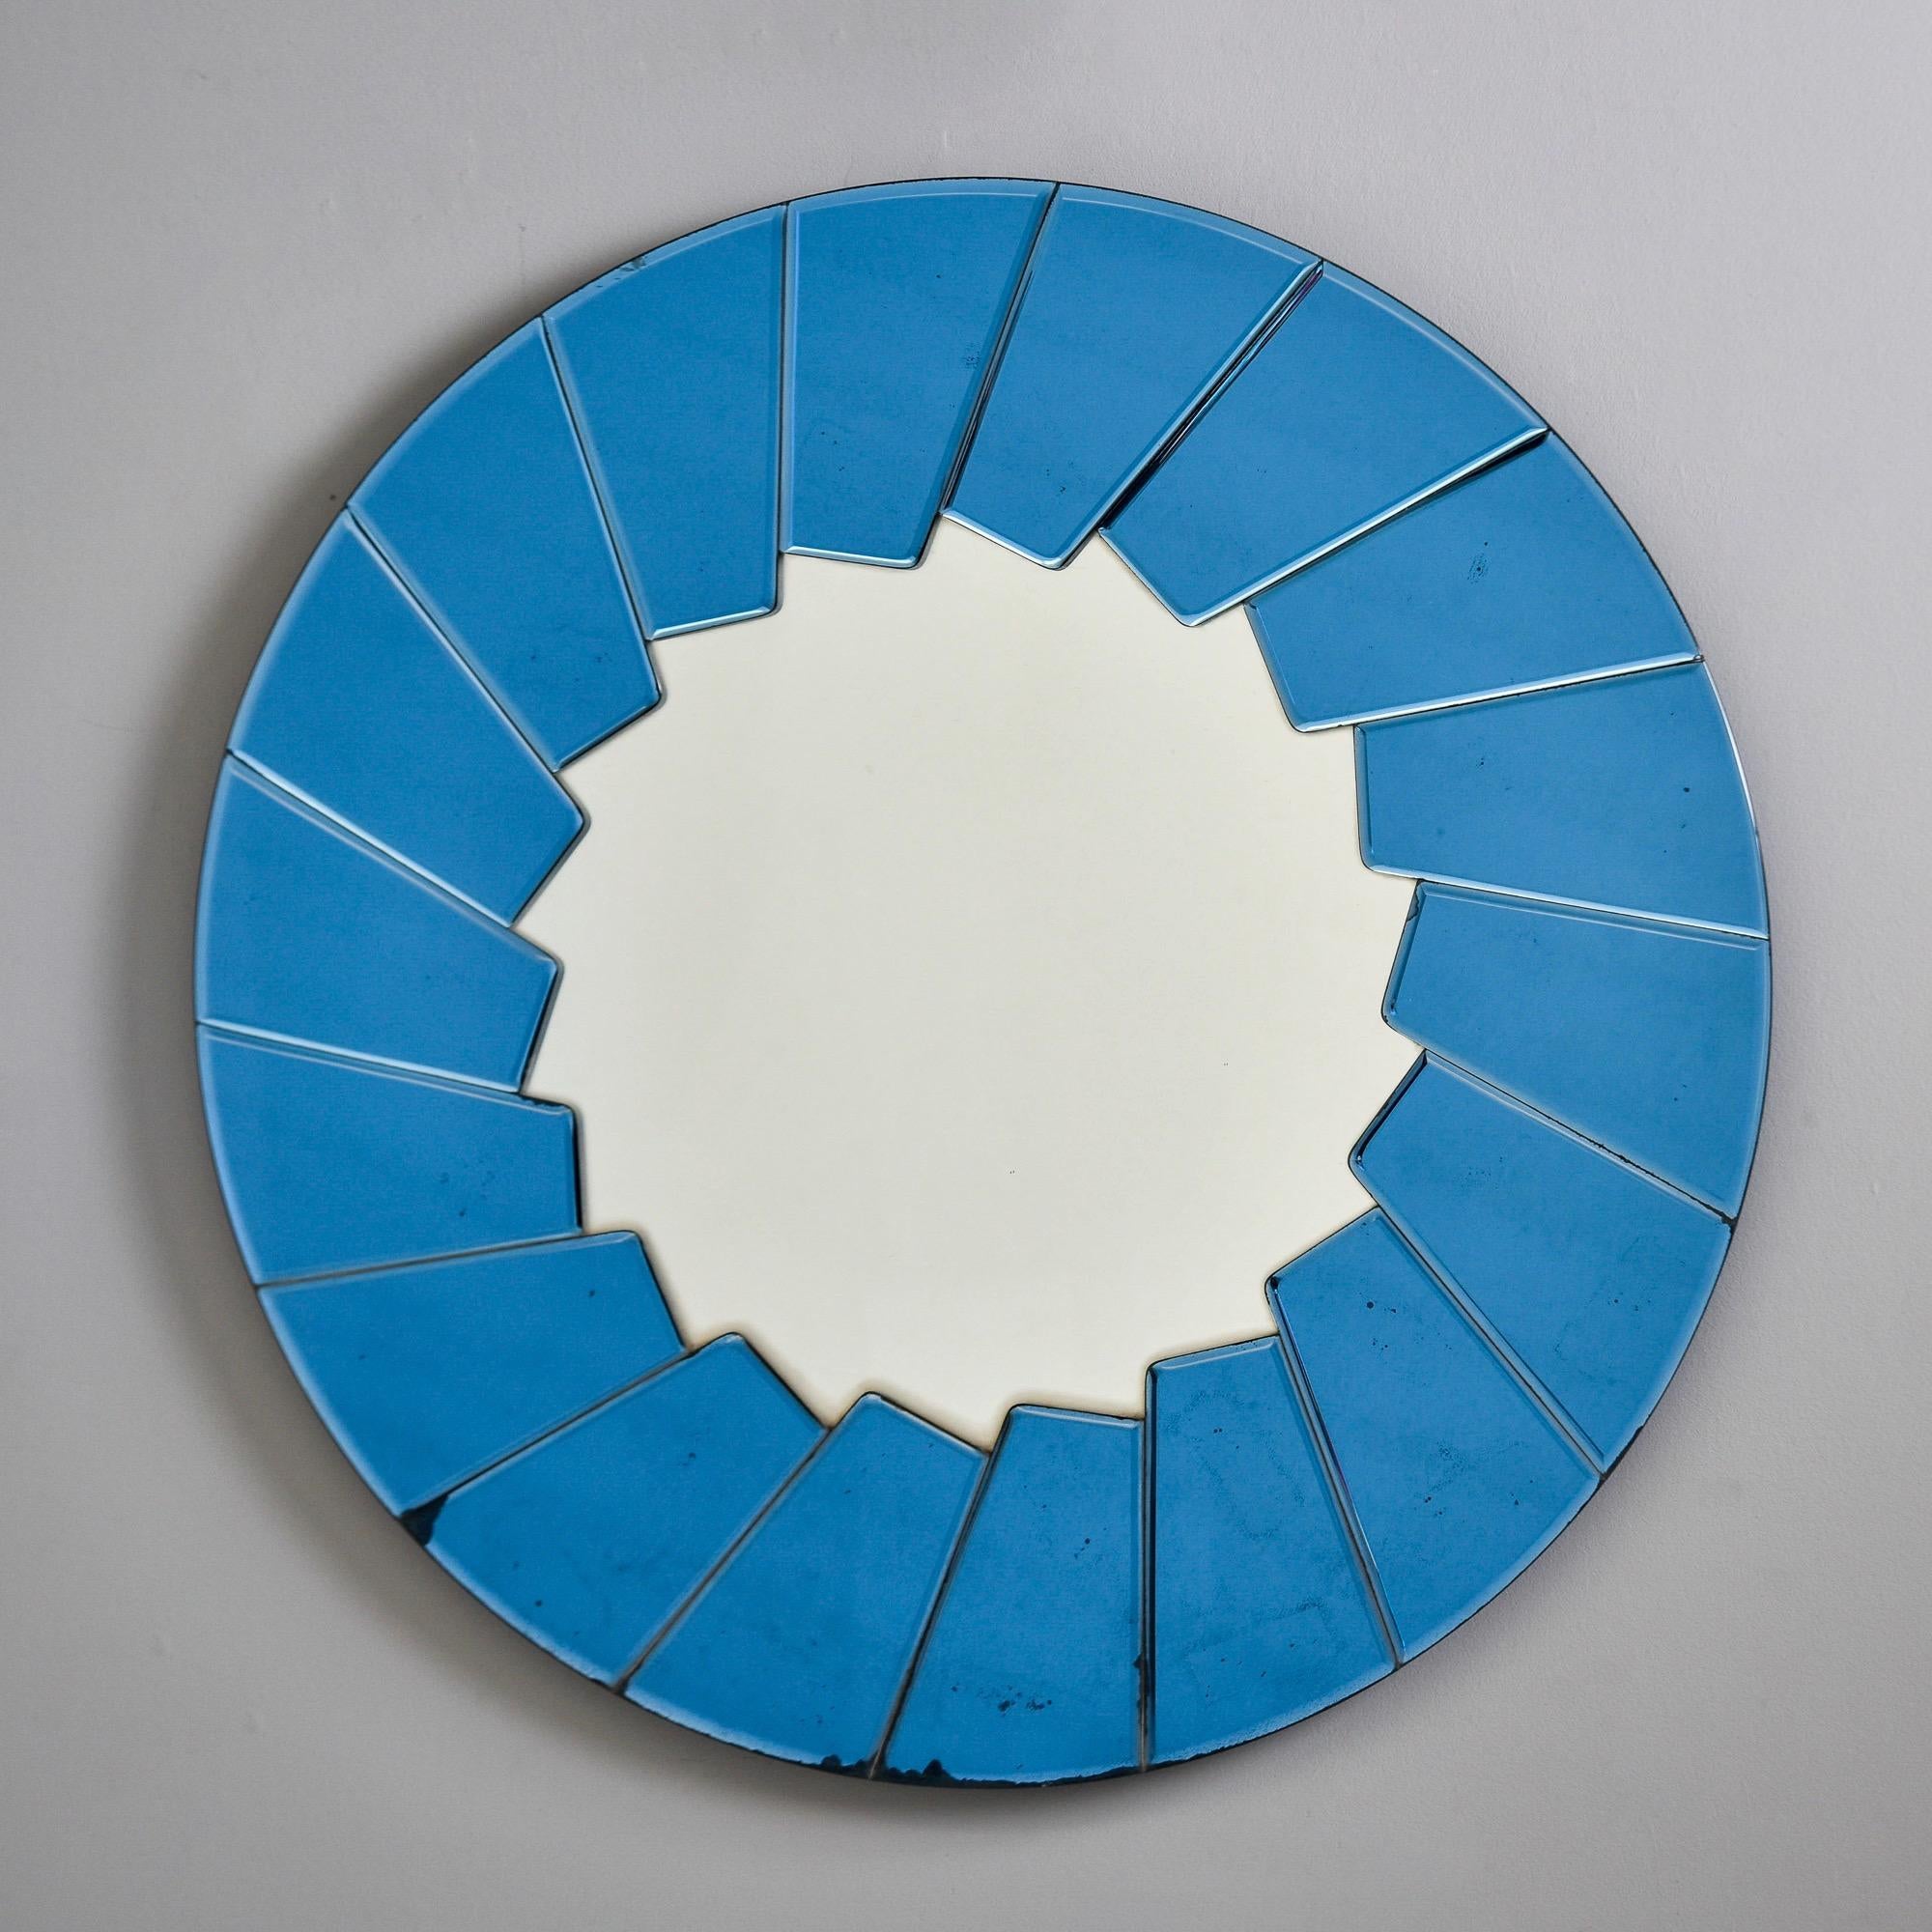 Found in Italy, this round mirror dates from the 1960s. Center mirror is framed by applied blue colored glass elements. Back has a metal hanger. Unknown maker. Very good overall vintage condition with some scattered dark spots to blue colored glass